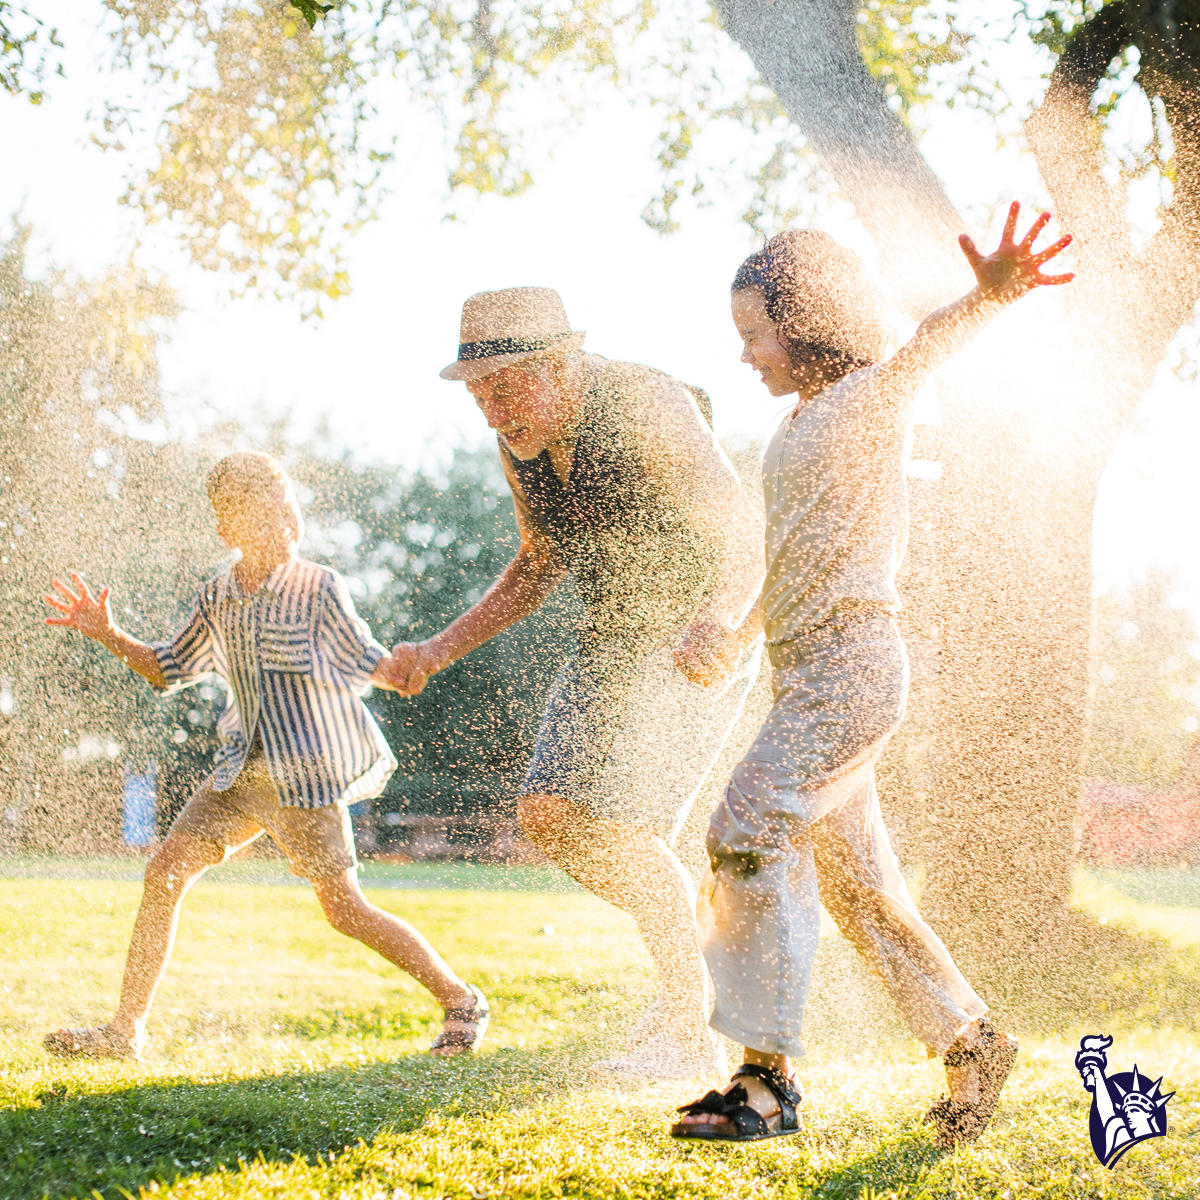 Family playing in sprinklers Brian Mulligan at Comparion Insurance Agency Rochester (585)670-2990